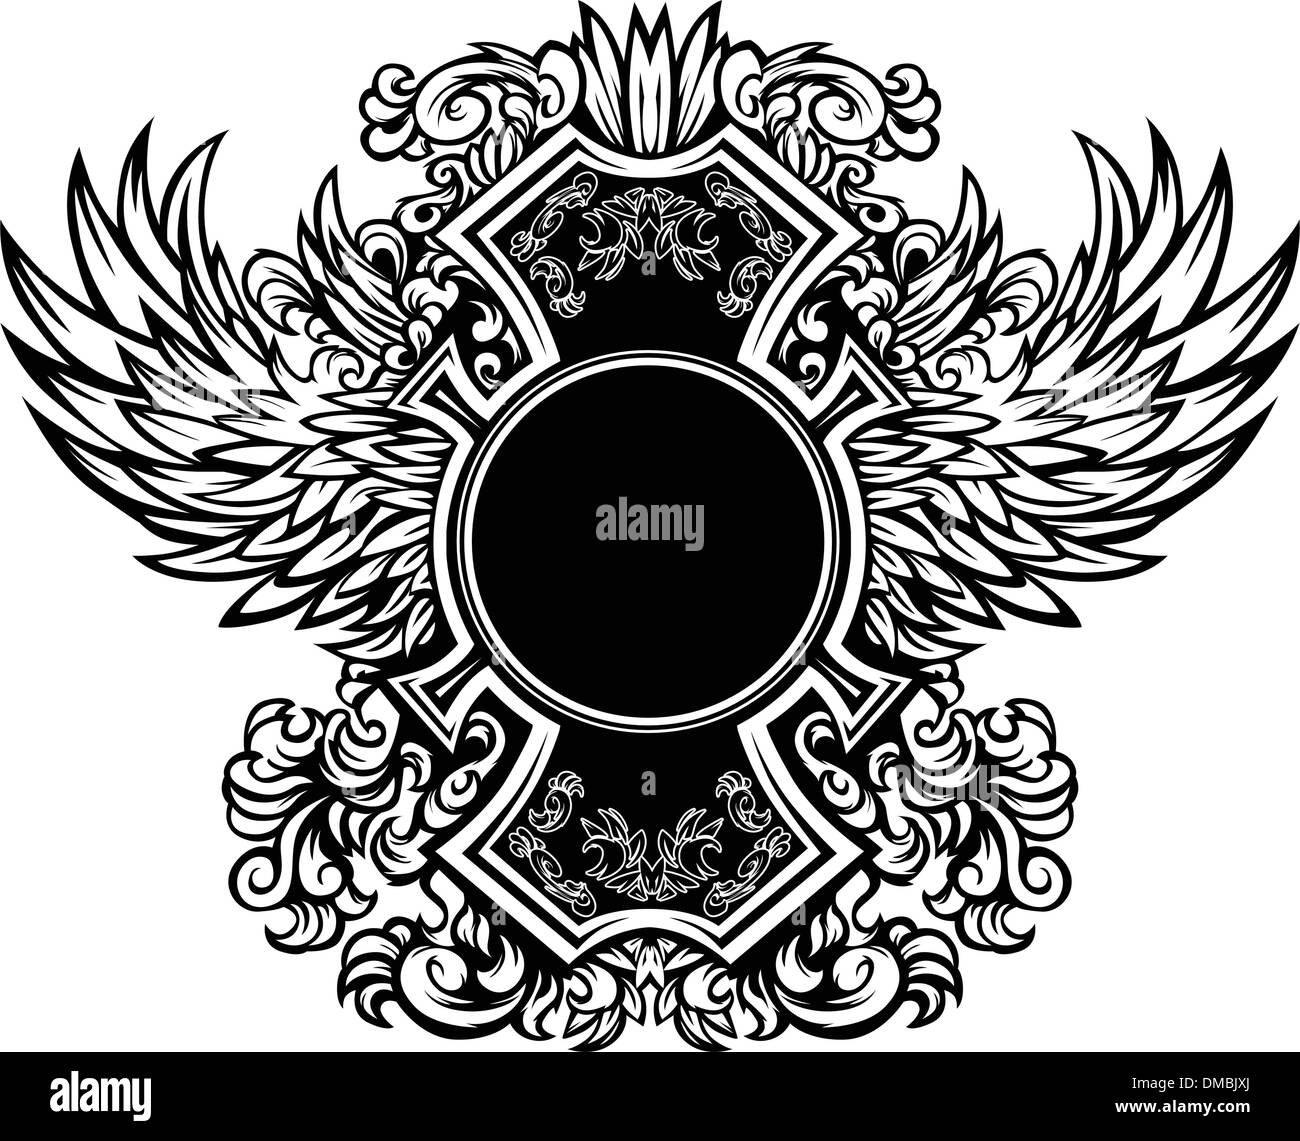 Ornate Graphic Vector Template with wings Stock Vector